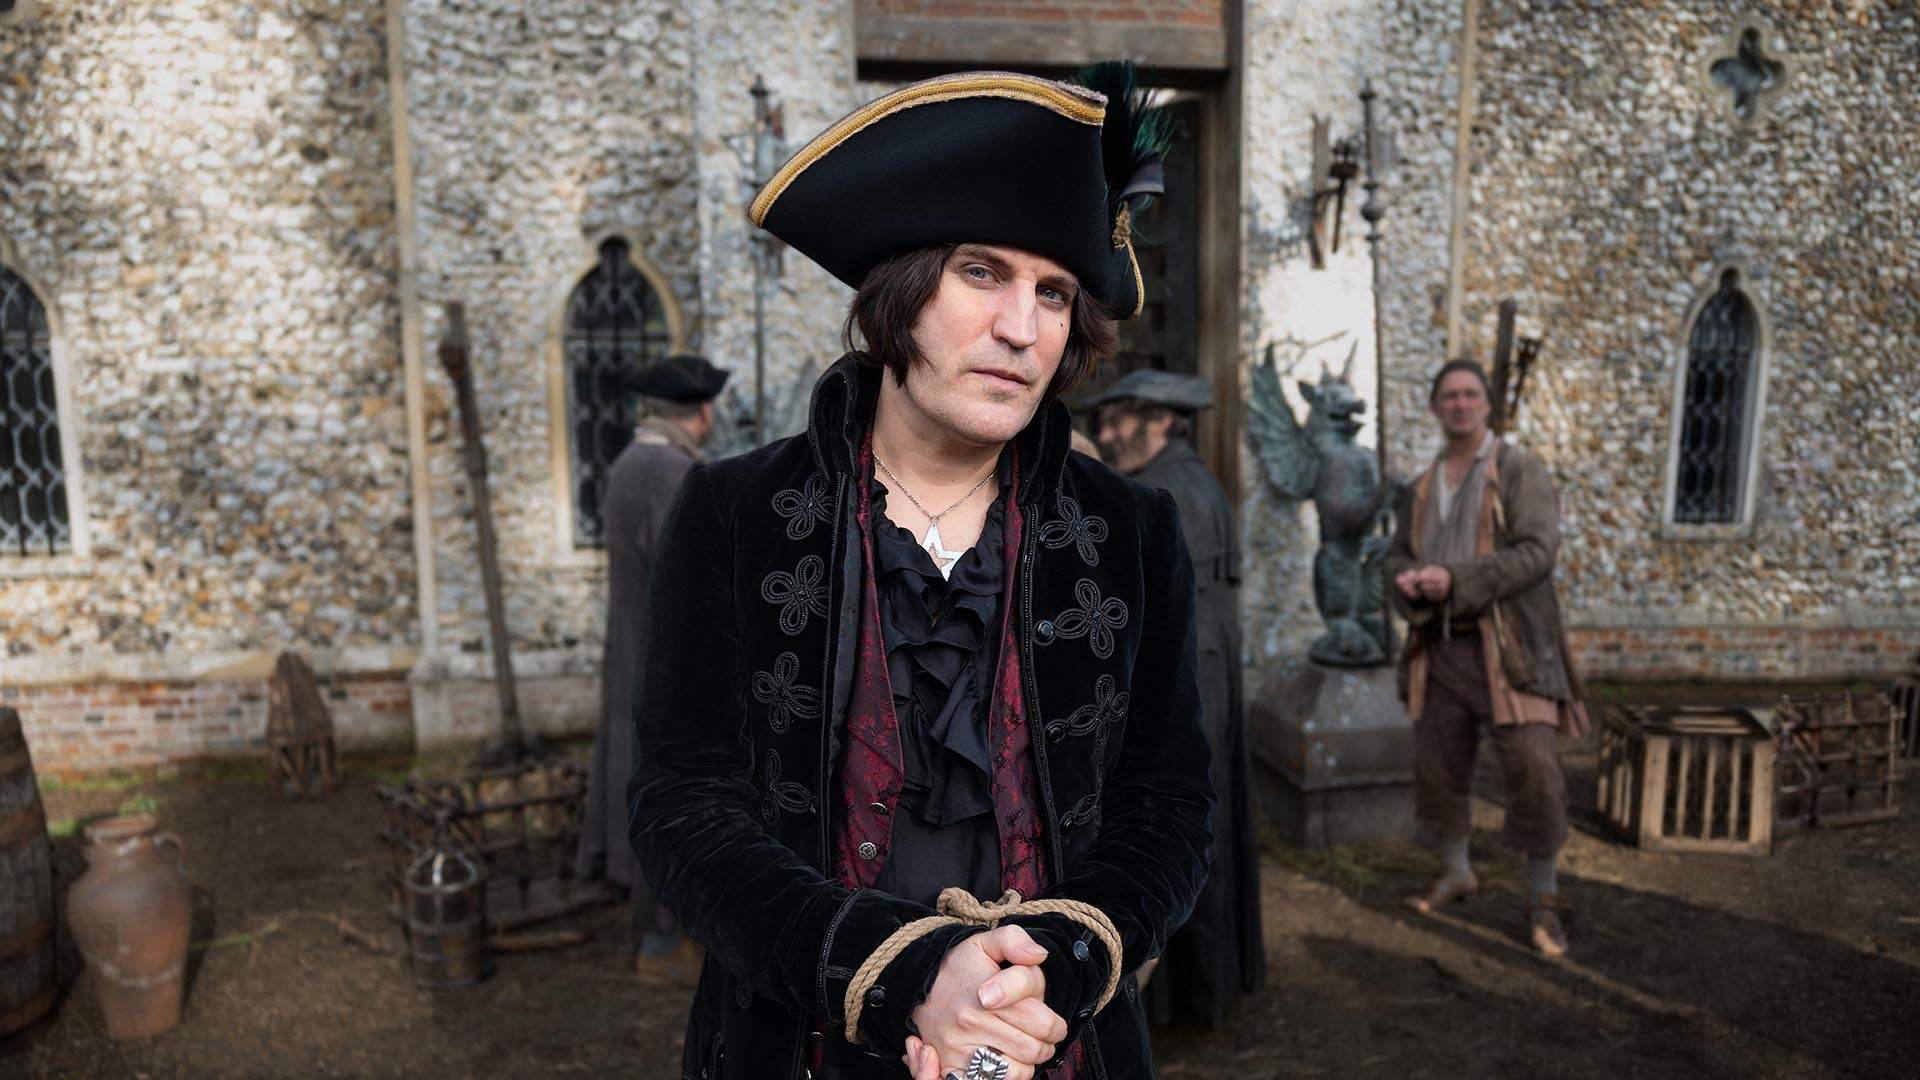 Noel Fielding Swaps 'The Mighty Boosh' for Outlaw Life in 'The Completely Made-Up Adventures of Dick Turpin'